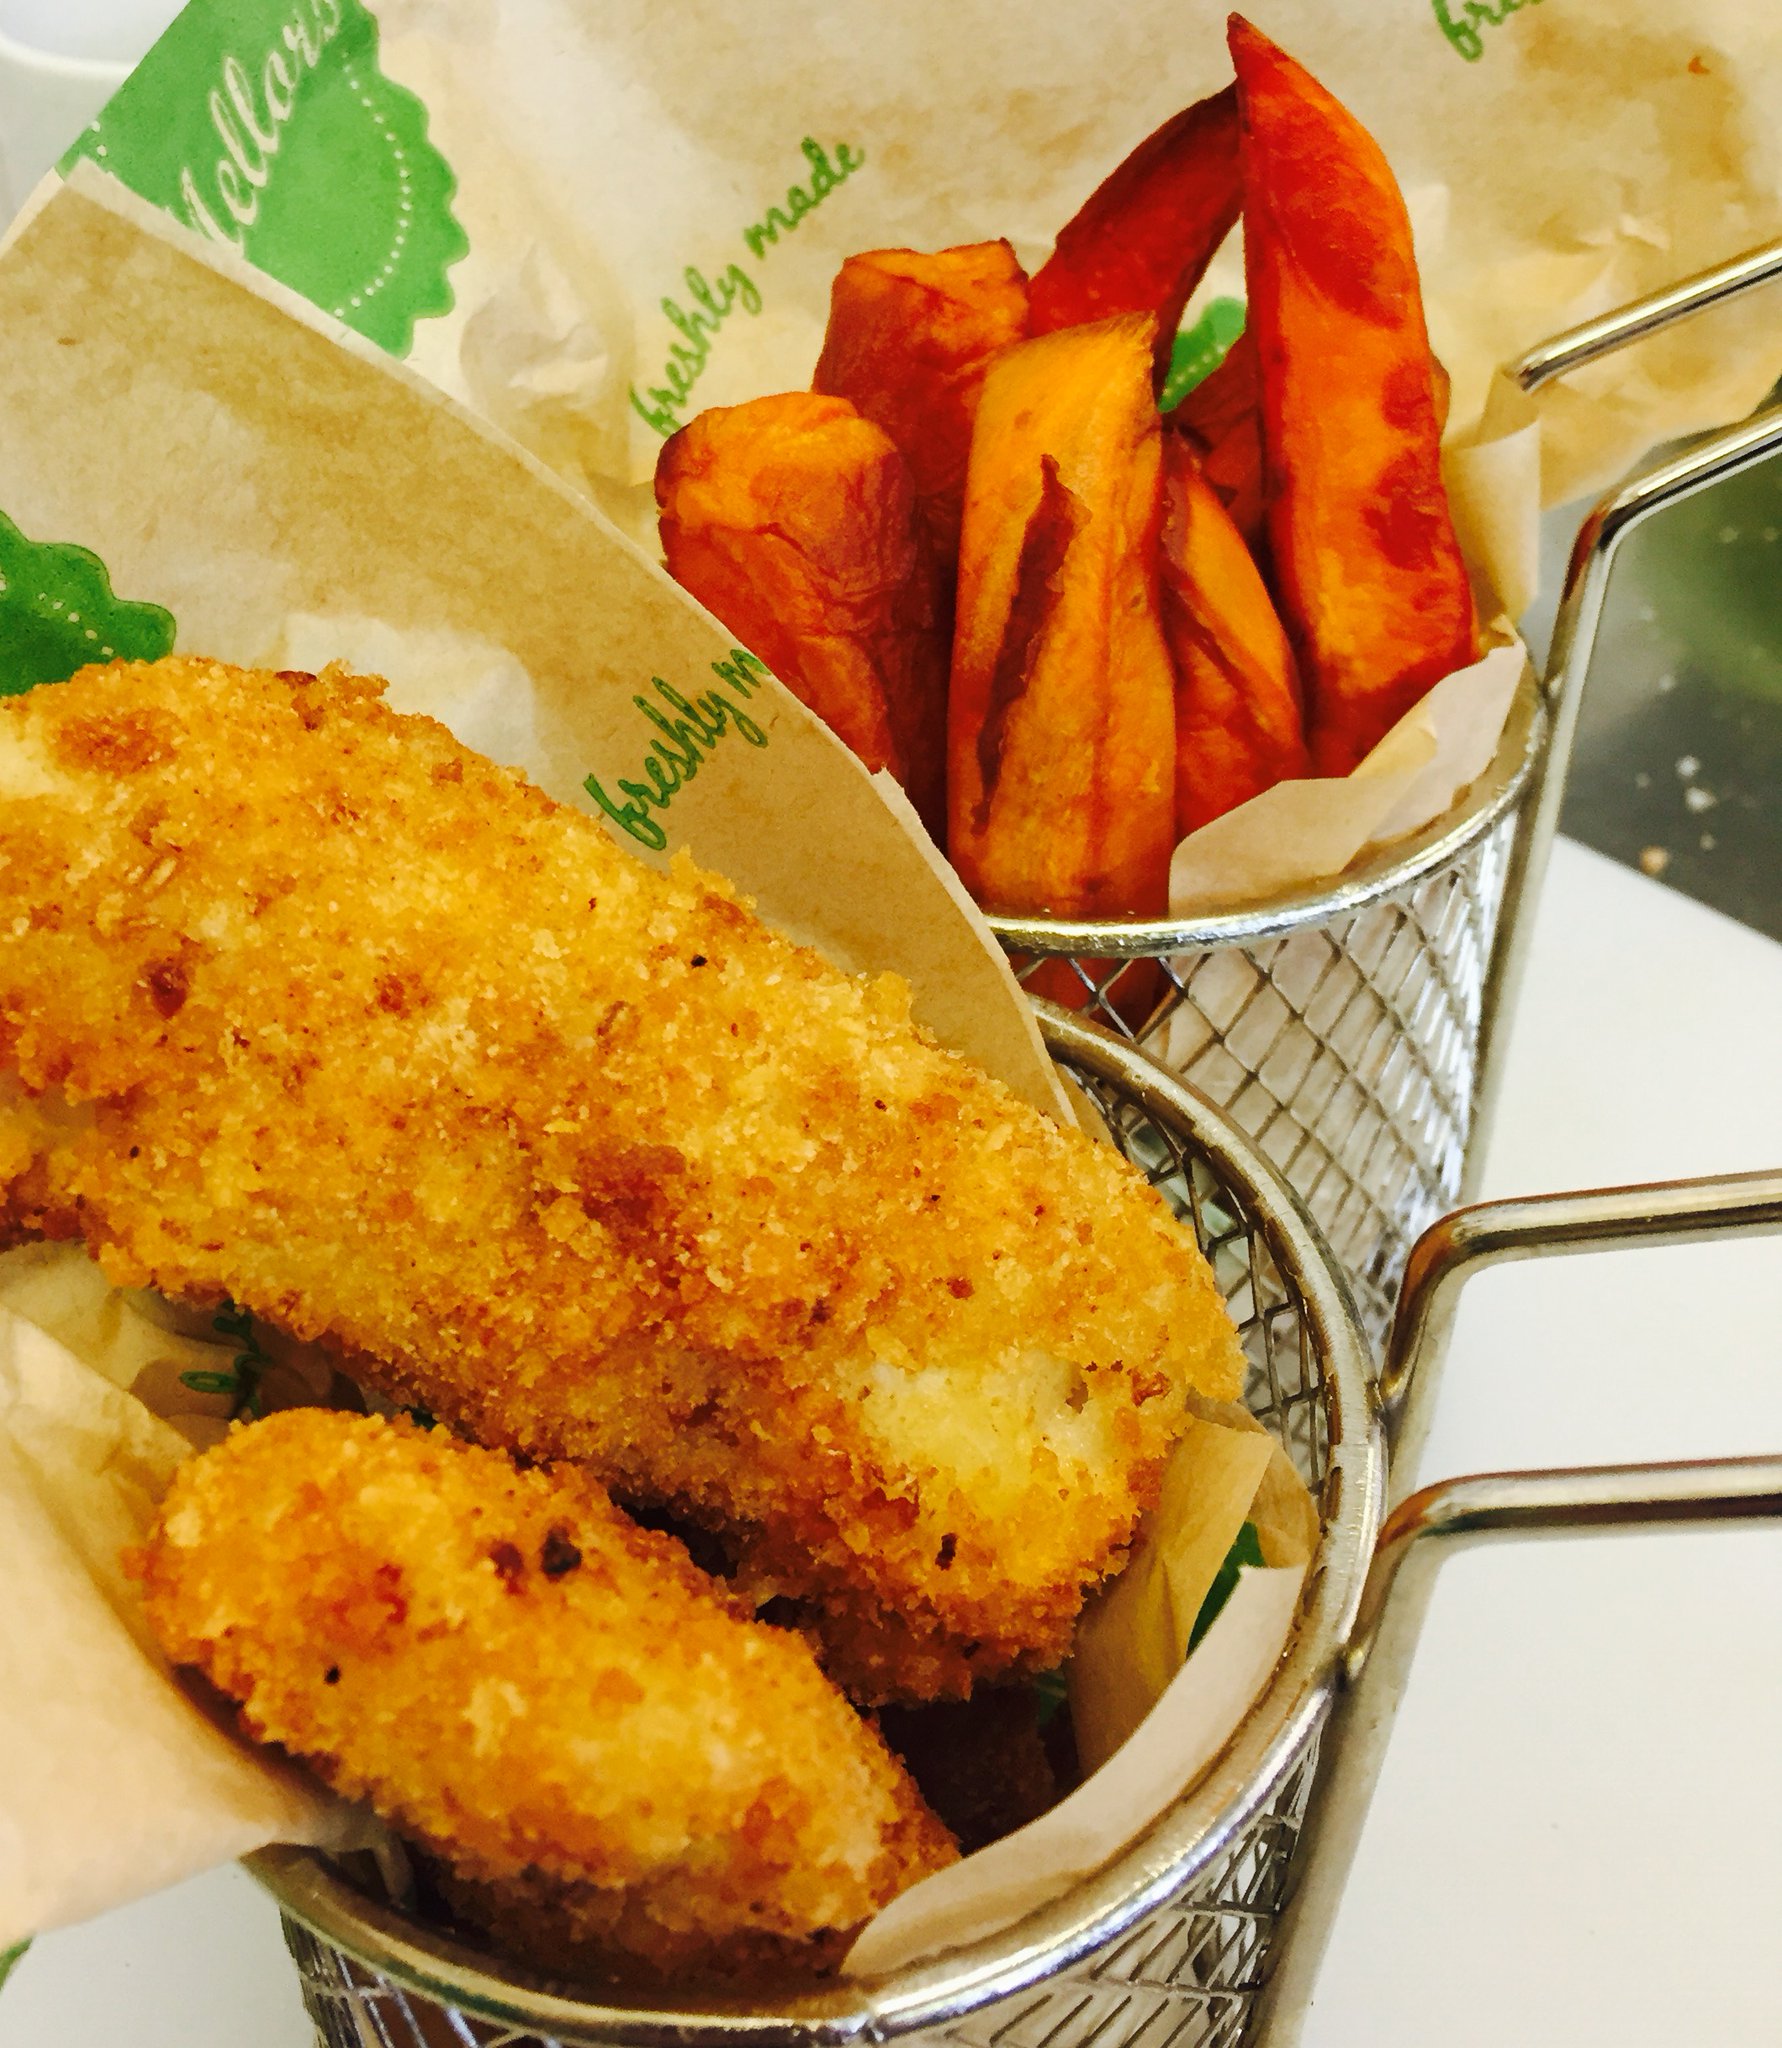 Celebrating National Fish and Chip Day!